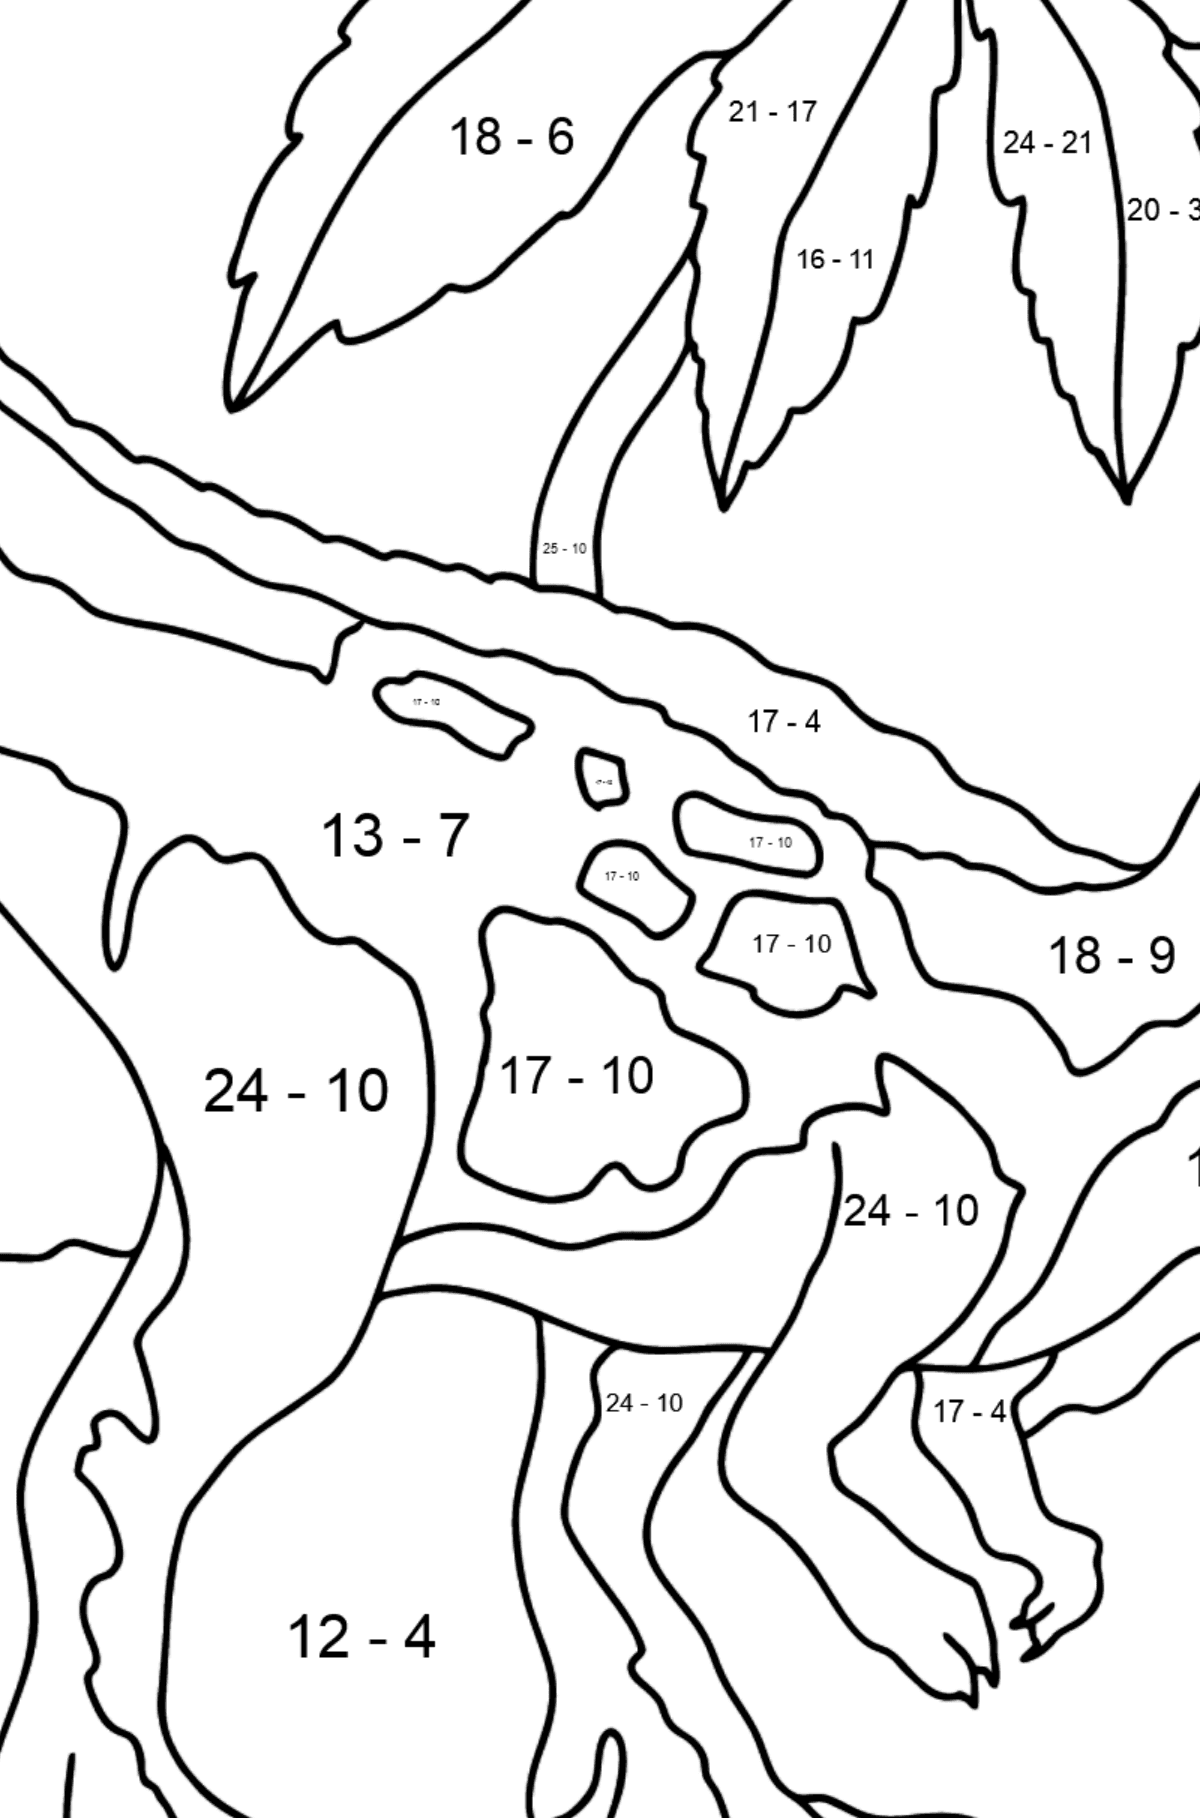 Coloring Page - Tyrannosaurus - The King of Dinosaurs - Math Coloring - Subtraction for Kids